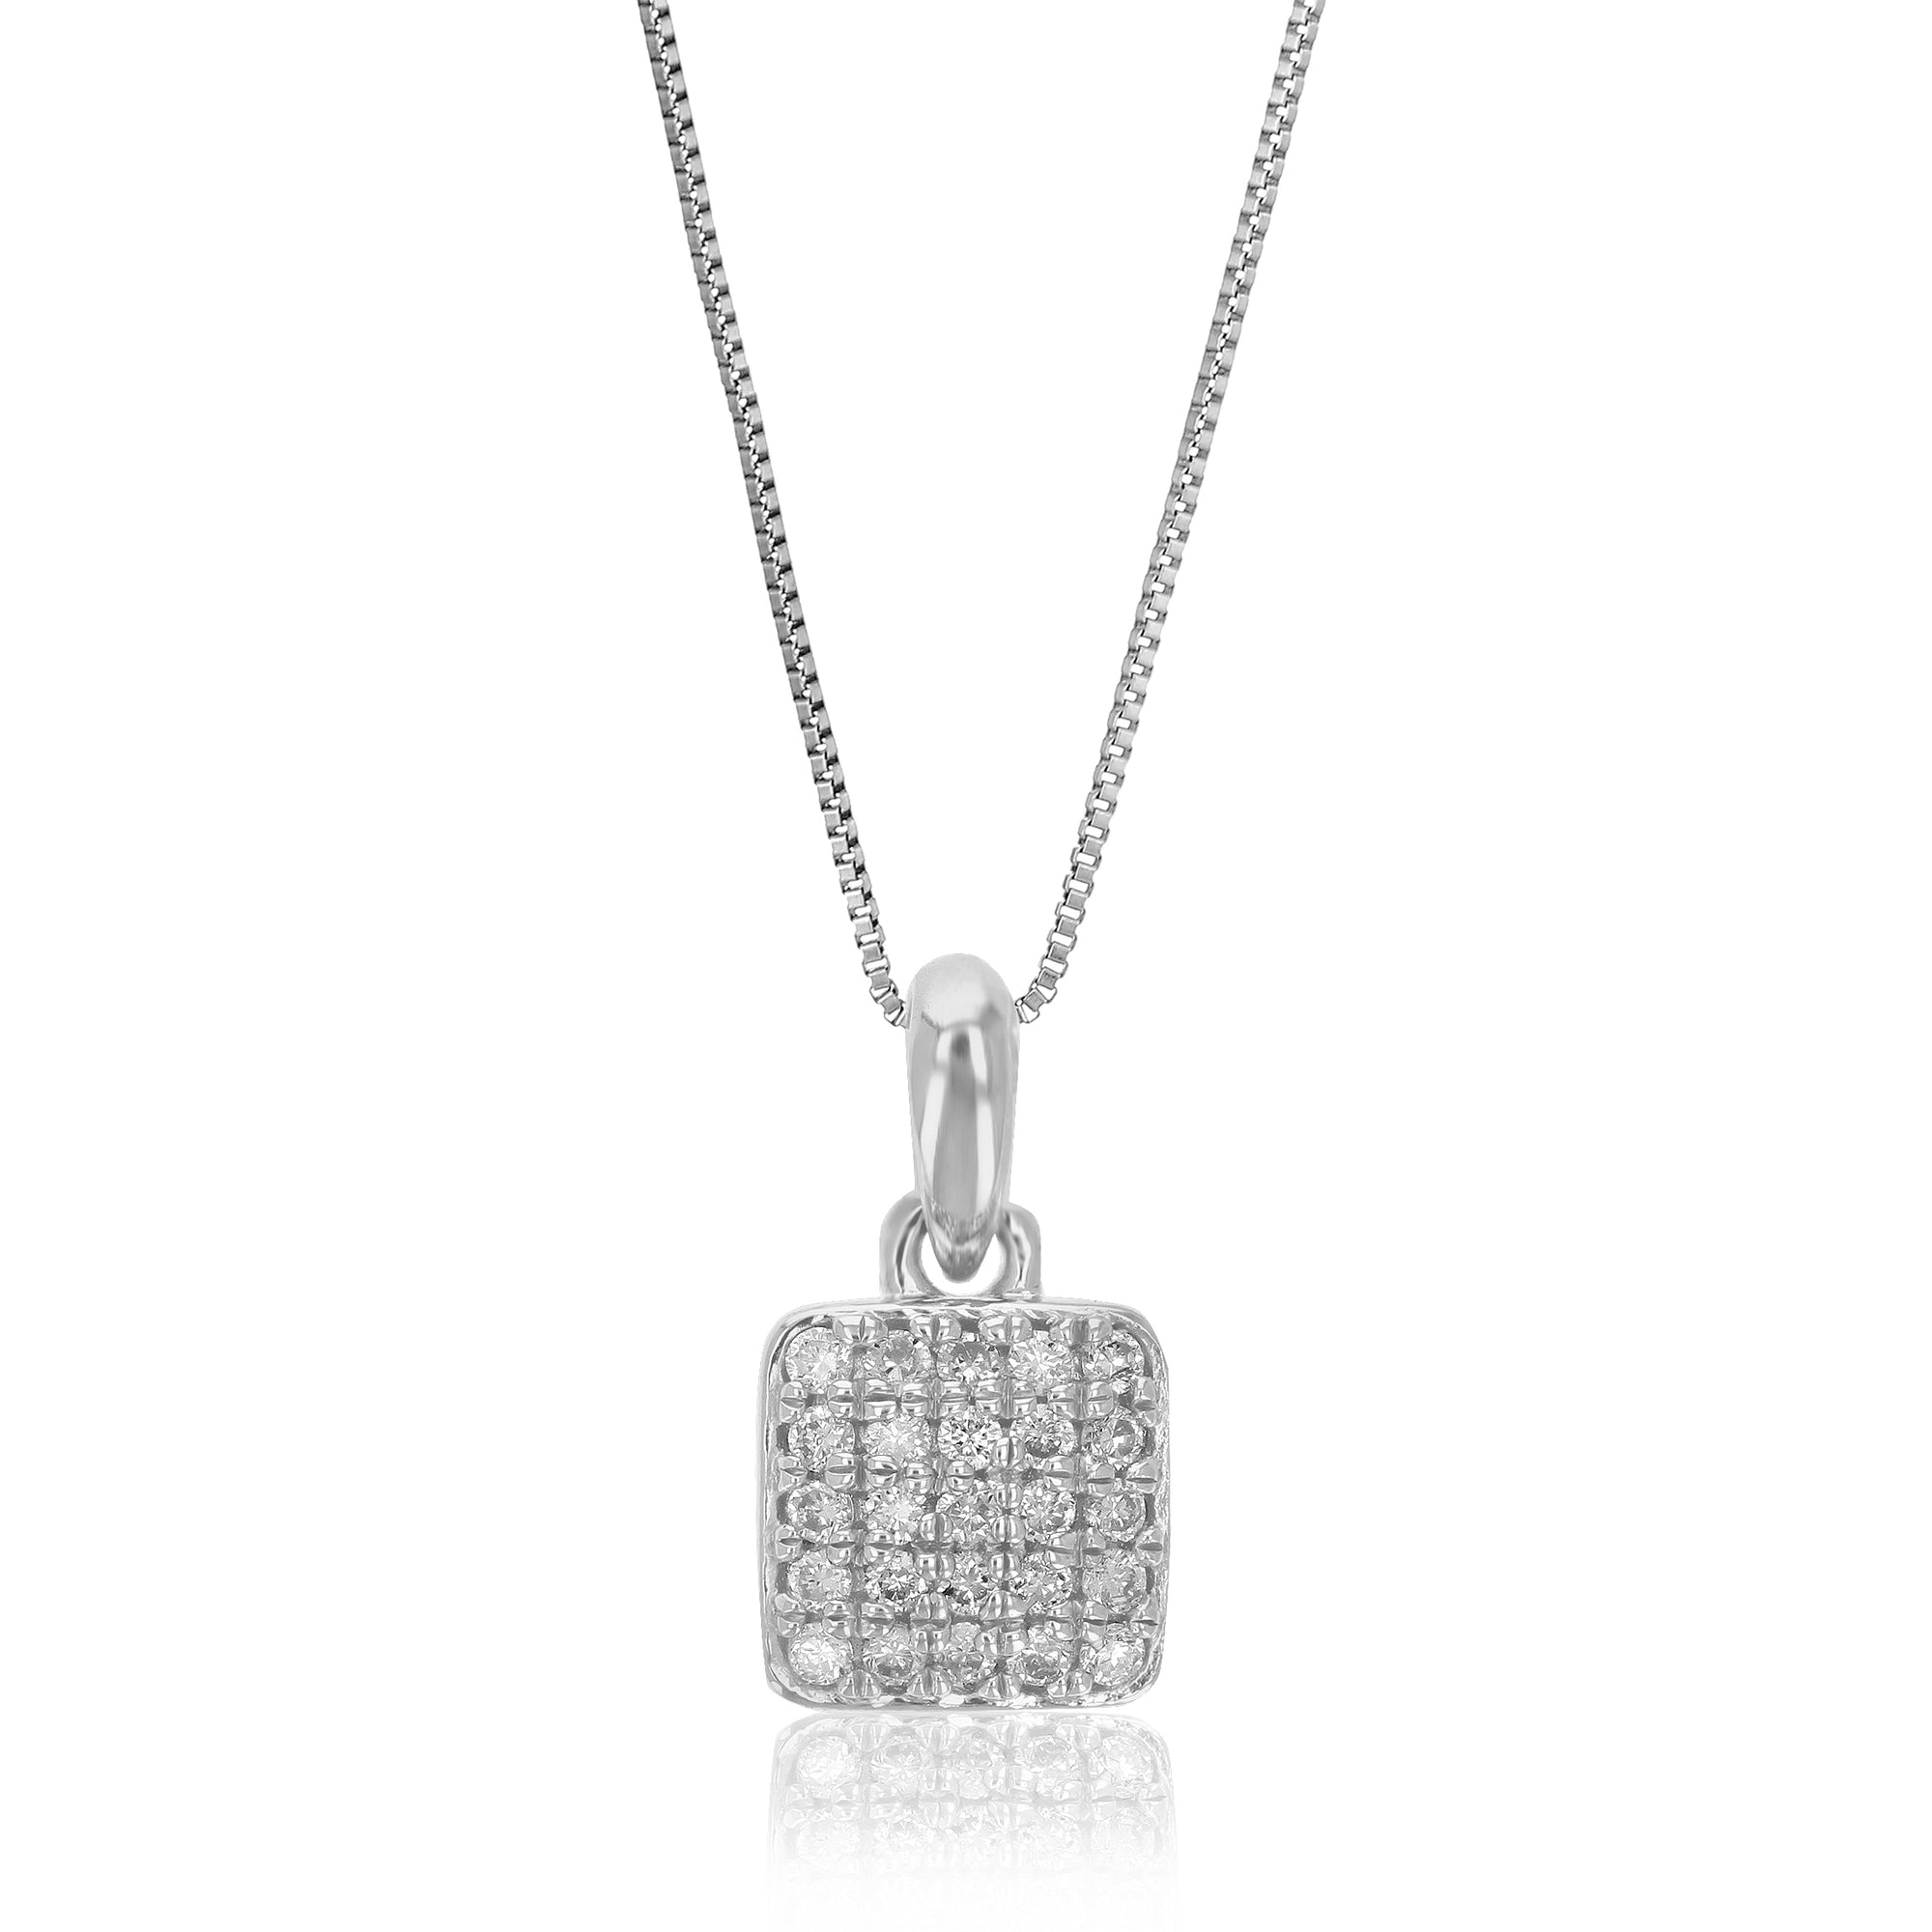 1/10 cttw Diamond Pendant Necklace for Women, Lab Grown Diamond Square Pendant Necklace in .925 Sterling Silver with Chain, Size 2/5 Inch